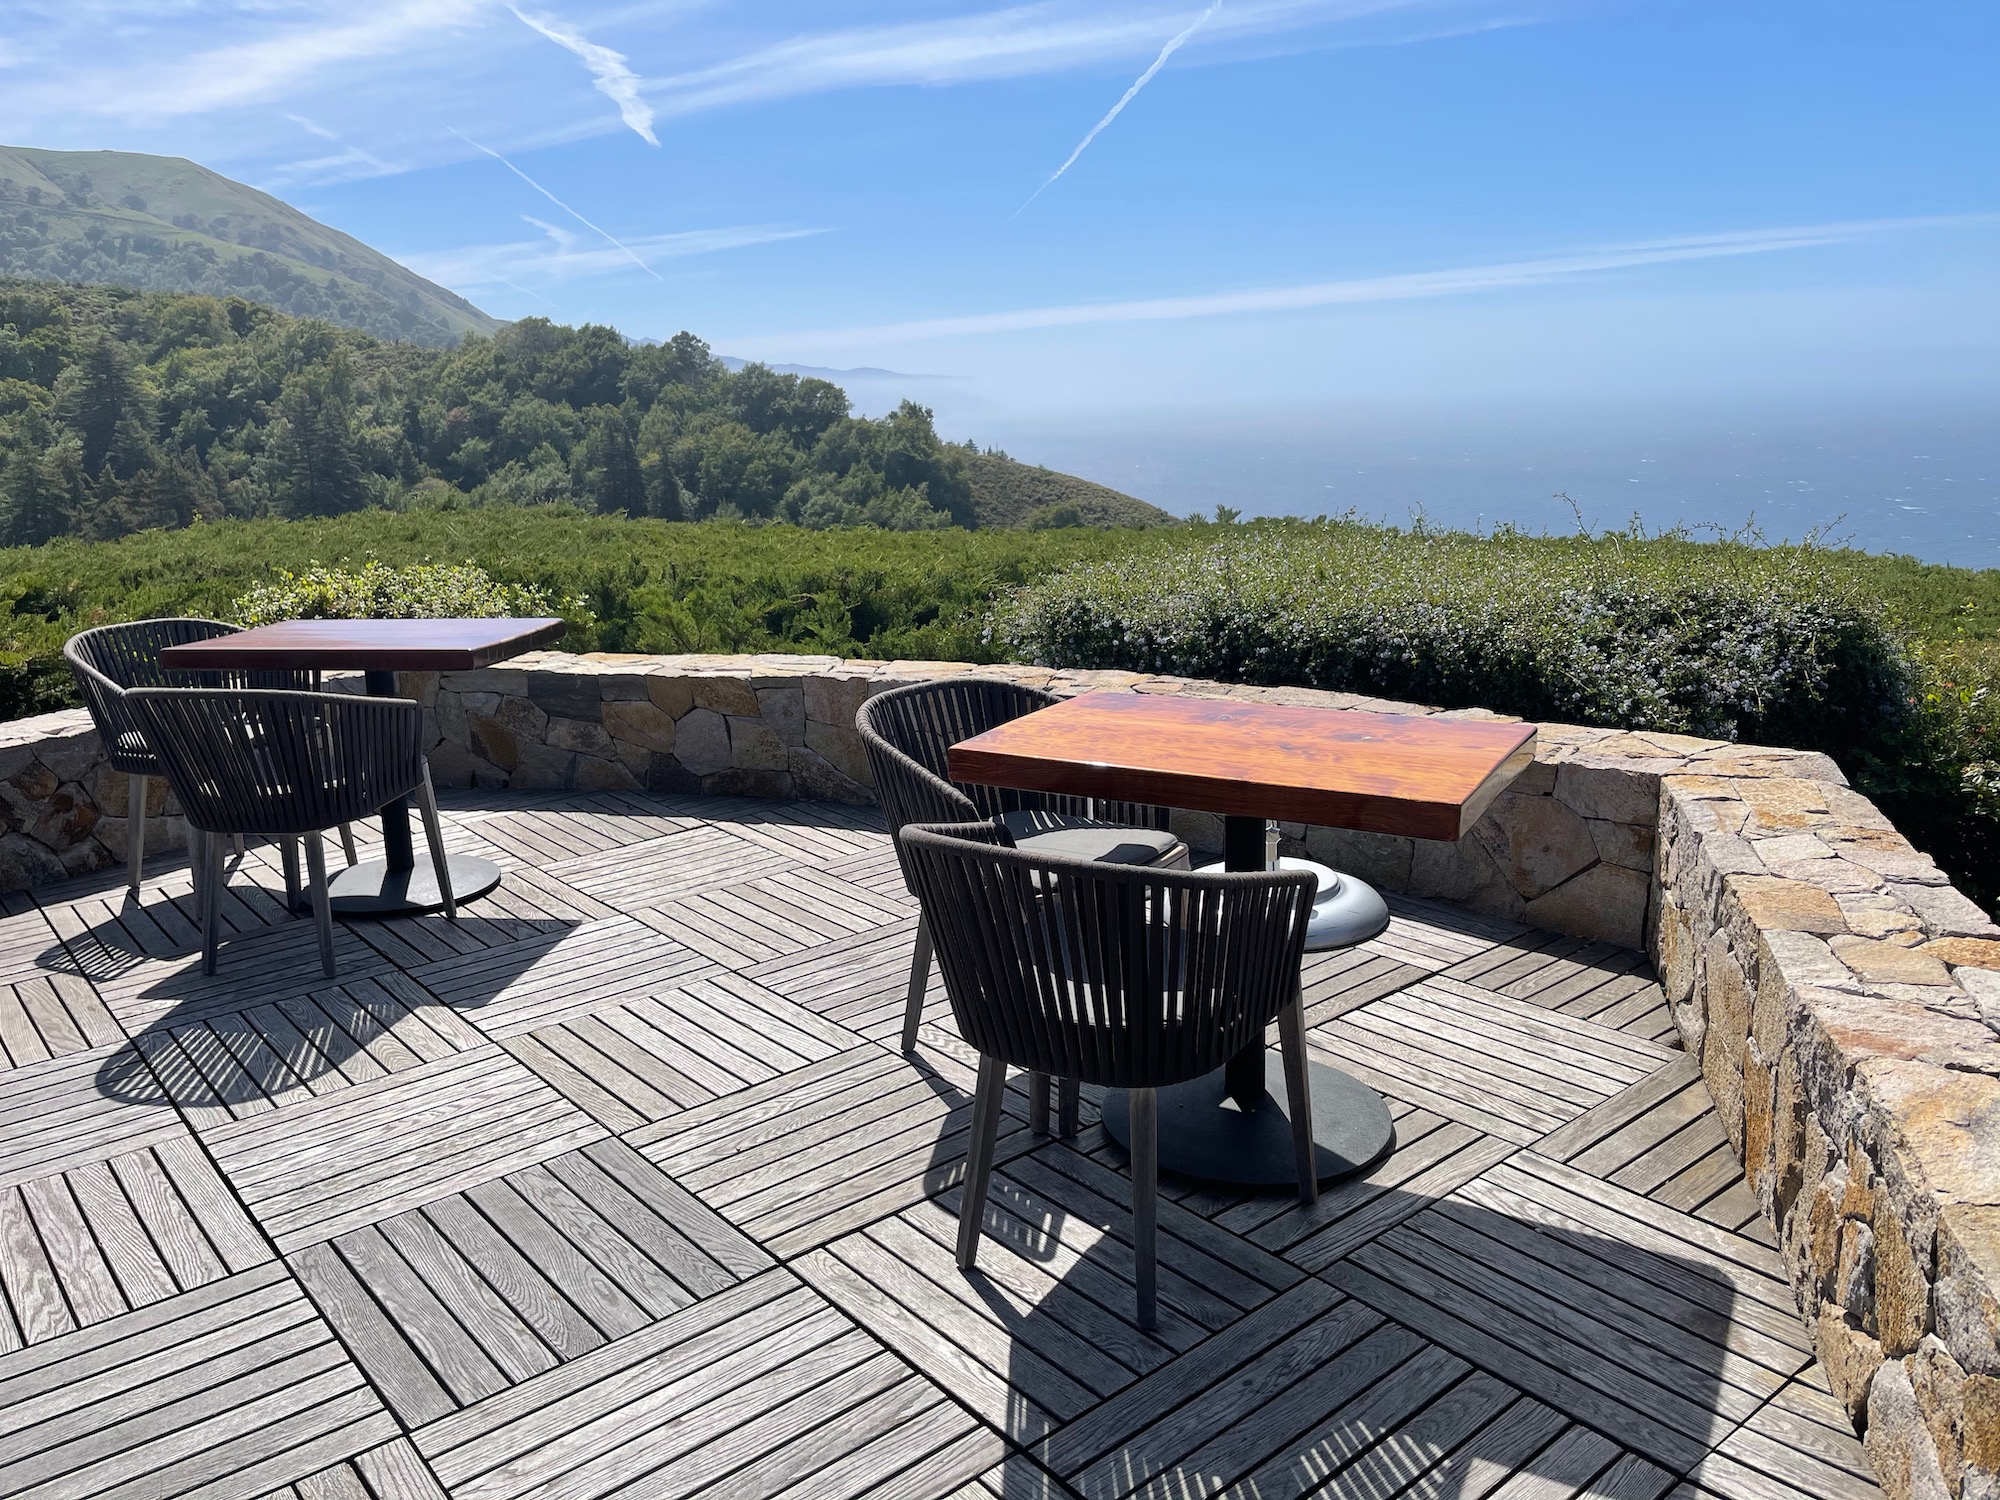 a table and chairs on a patio overlooking a vineyard